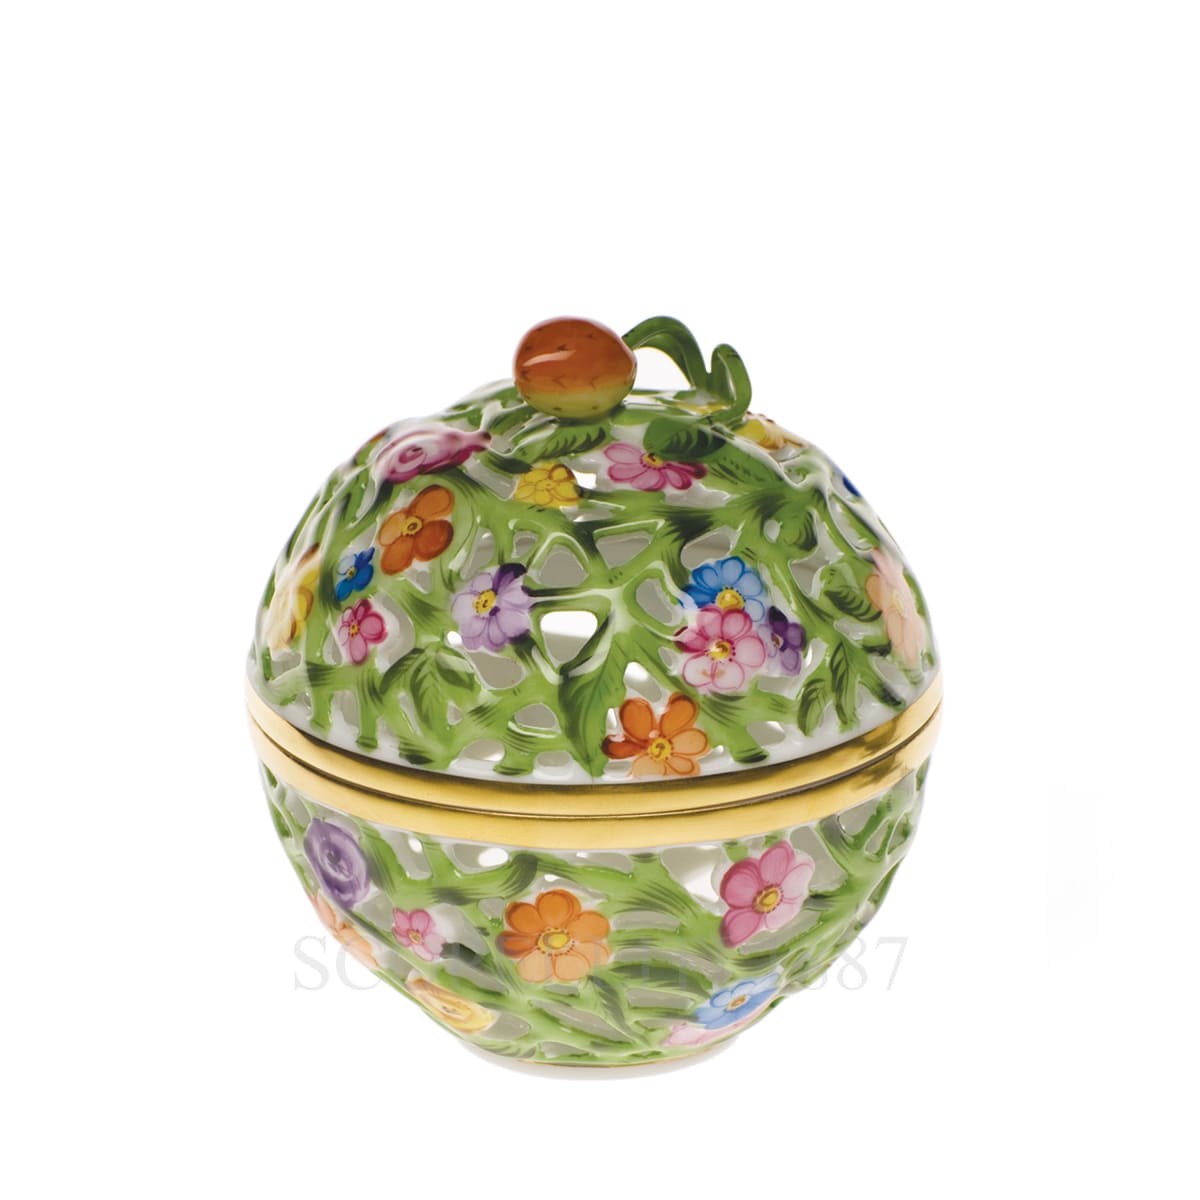 herend handpainted porcelain round box with strawberry